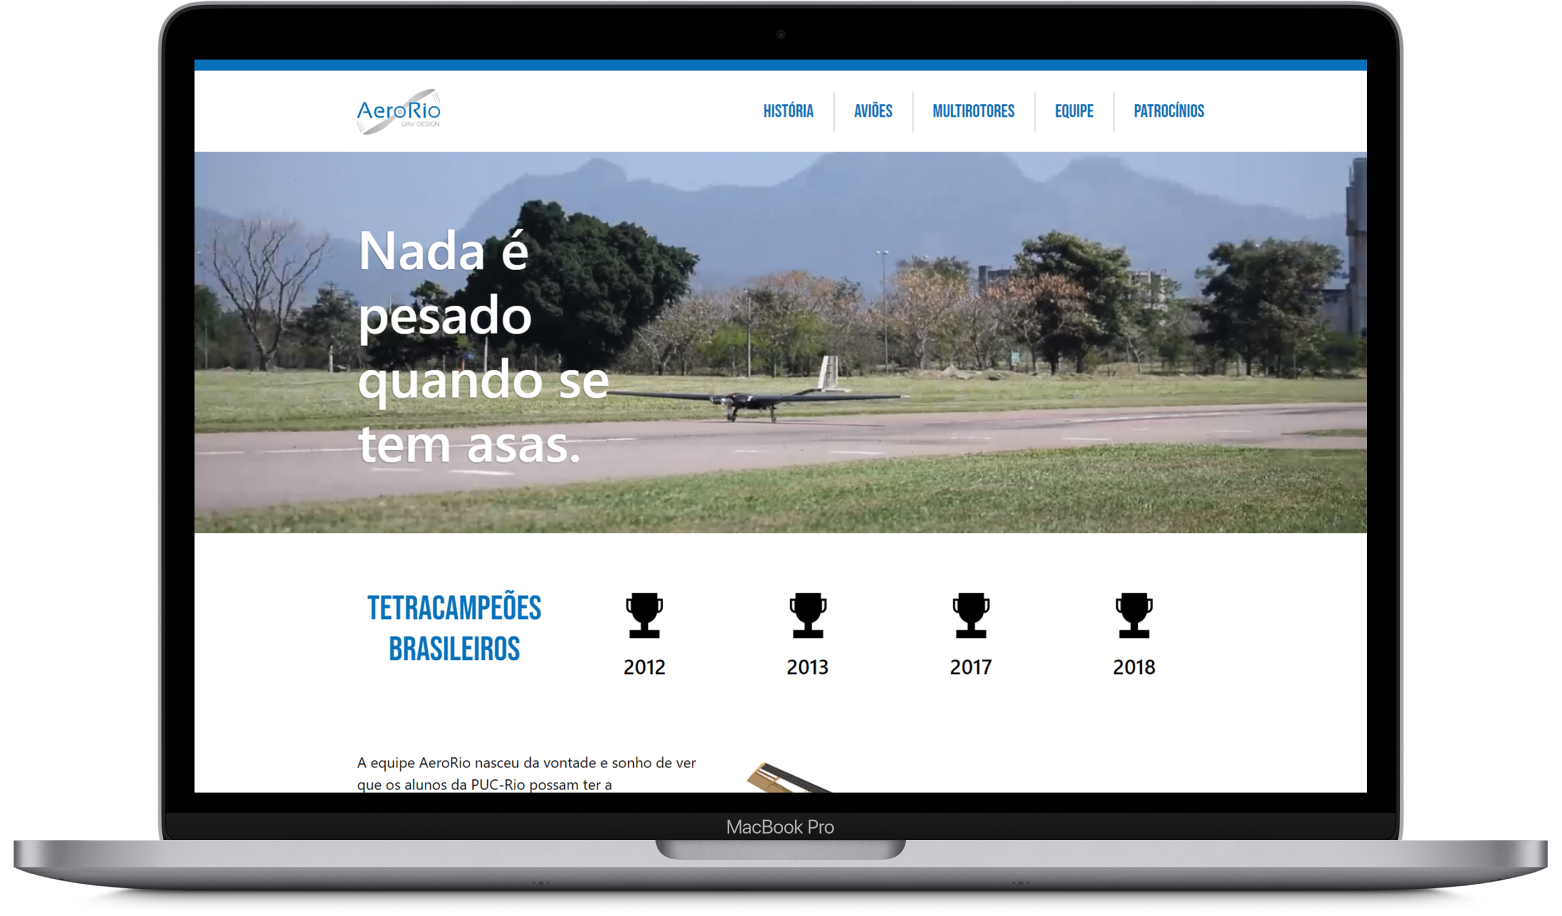 Computer showing AeroRio's website first page